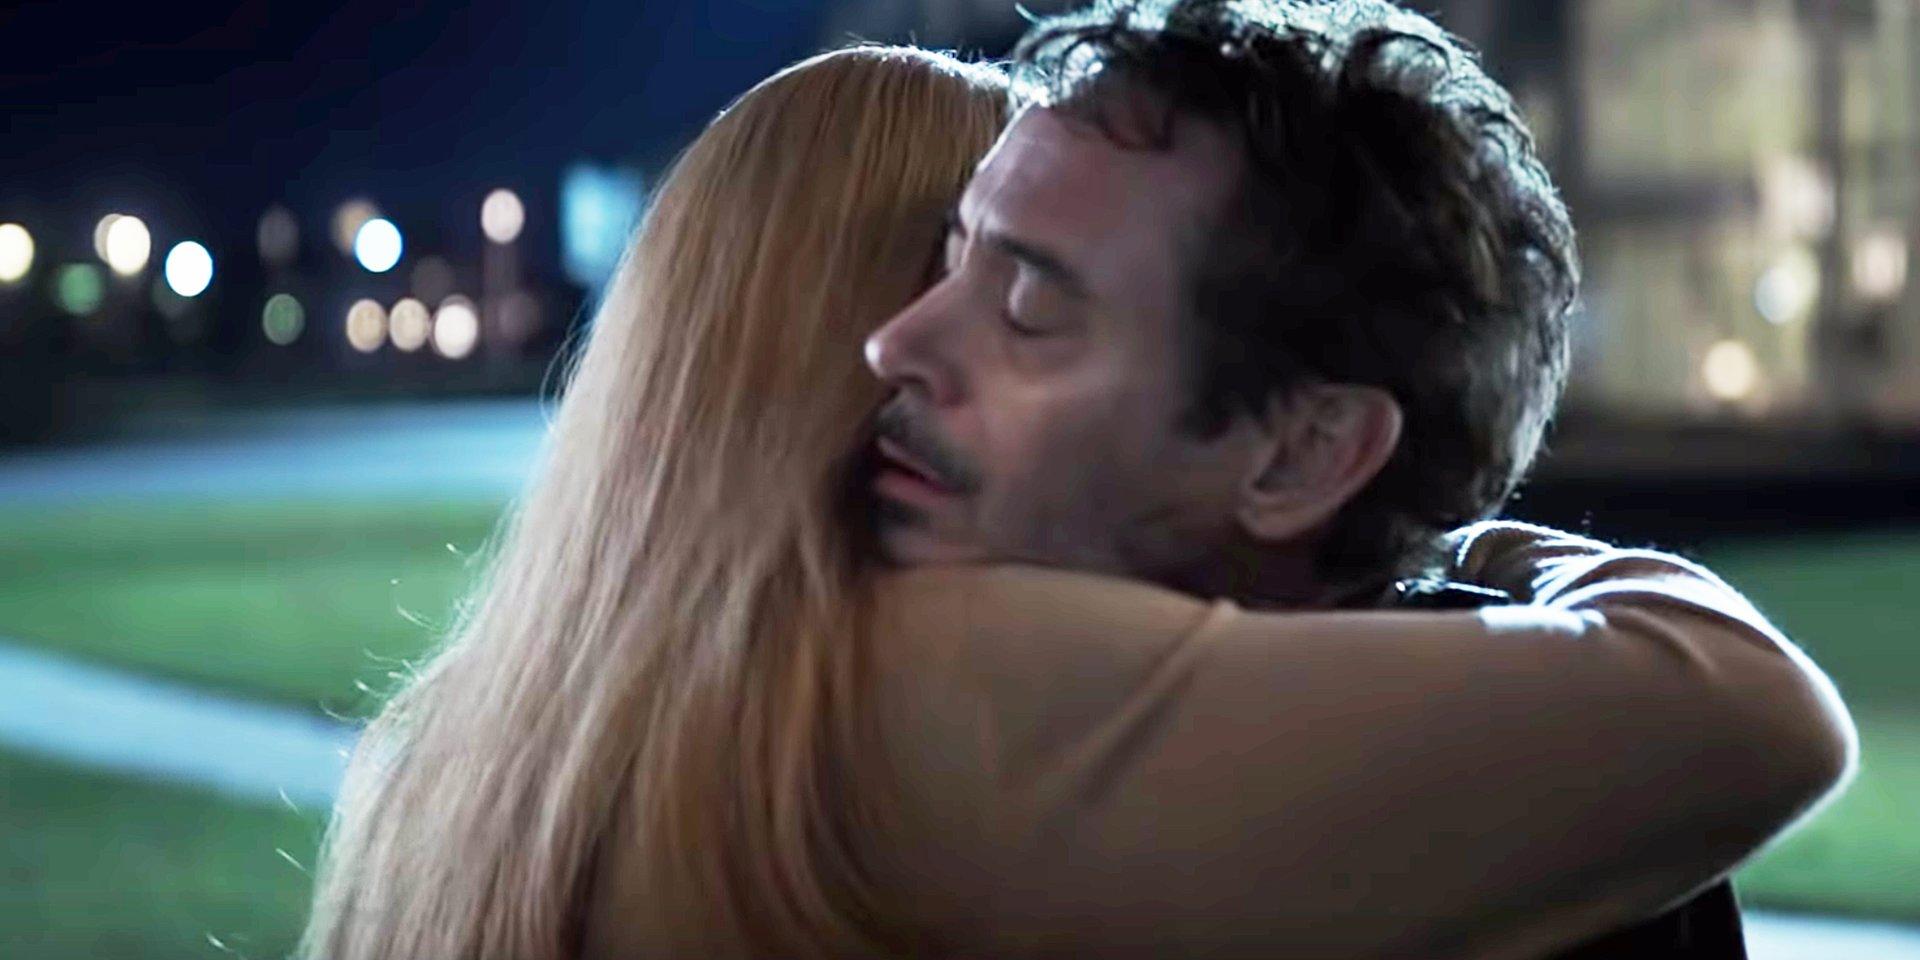 Fans react to Tony Stark and Pepper Potts' reunion